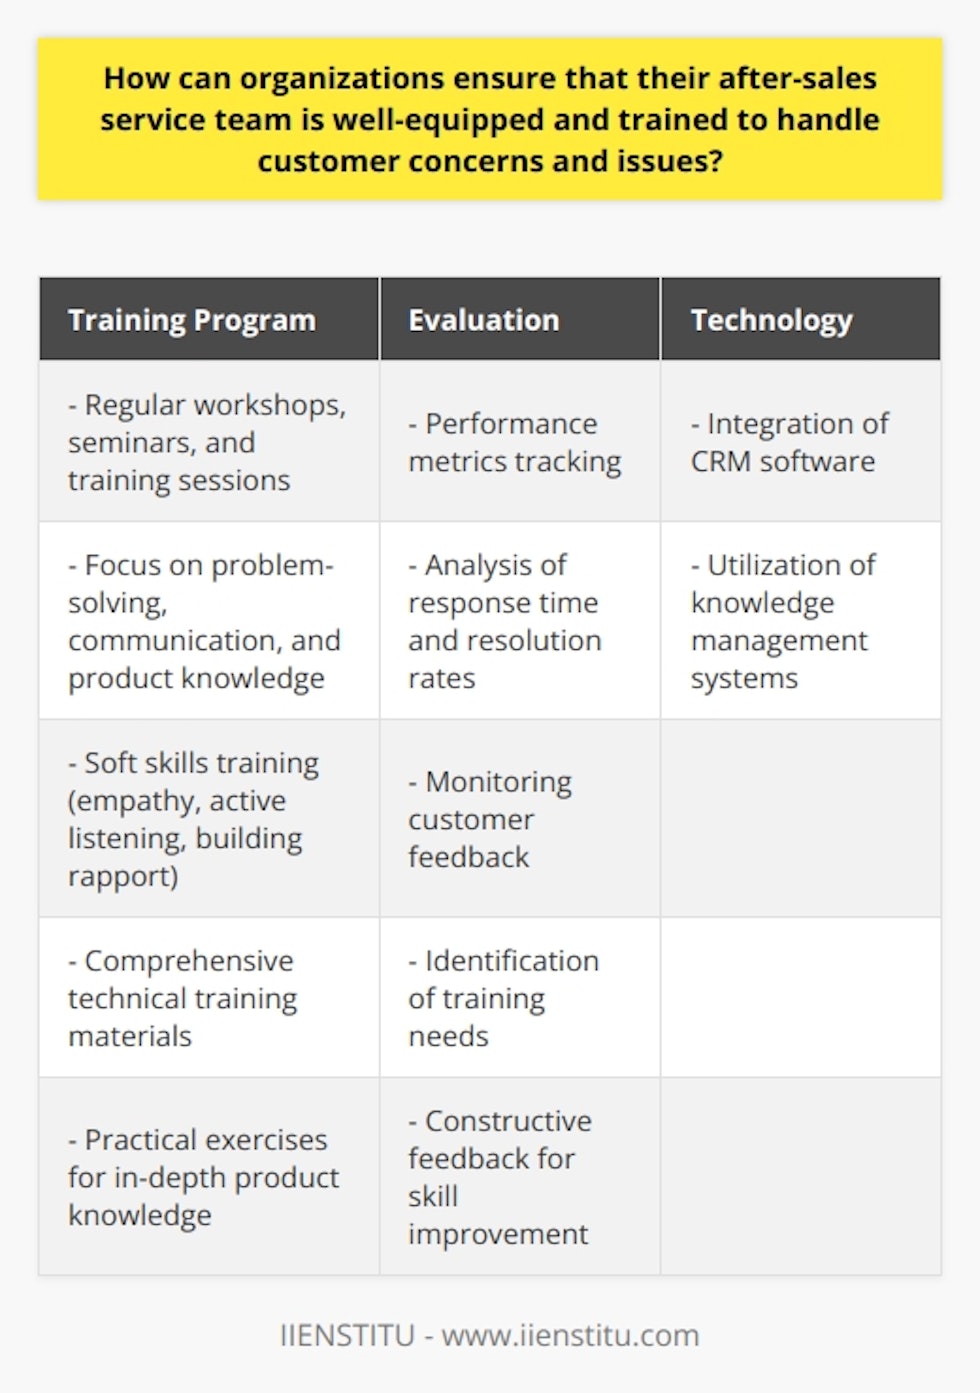 The success of an organization's after-sales service team relies on their ability to handle customer concerns and issues efficiently. To ensure that the team is well-equipped and trained, organizations need to establish a robust training program that focuses on developing key competencies, including problem-solving, communication, and product knowledge. This program should include regular workshops, seminars, and training sessions to enhance the service team's skills and keep them updated on company products, policies, and procedures.In addition to technical knowledge, soft skills training is also essential for an exceptional after-sales service. Skills such as empathy, active listening, and building rapport with customers help establish lasting relationships. Organizations should invest in training modules that encourage employees to practice and improve their soft skills. Service team members should learn to understand customer needs, respond appropriately, and maintain a professional attitude.Technical expertise is also vital for after-sales service teams, as they frequently deal with technical issues. Organizations should provide comprehensive training materials and practical exercises to equip the team with in-depth knowledge of product features, functionality, and operating principles. This technical grounding enables the service team to provide effective solutions and improve customer satisfaction.Continuously monitoring and evaluating the performance of the after-sales service team allows organizations to identify strengths and areas for improvement. Performance metrics such as response time, resolution rates, and customer feedback should be tracked and analyzed regularly. This data can help make data-driven decisions, identify training needs, and set achievable goals for the team. Periodic evaluations also enable employees to receive constructive feedback and improve their skills.Technology can significantly enhance the efficiency and effectiveness of after-sales service. Organizations should embrace tools and systems such as Customer Relationship Management (CRM) software and knowledge management systems that enable employees to access information quickly and easily. By integrating technology into daily workflows, the after-sales service team can stay organized, provide seamless support, and respond promptly to customer concerns and issues.In conclusion, organizations can ensure that their after-sales service team is well-equipped and trained by establishing a comprehensive training program, emphasizing soft skills and technical expertise, monitoring and evaluating team performance, and embracing technology. This holistic approach to training and development can lead to increased customer satisfaction and loyalty.